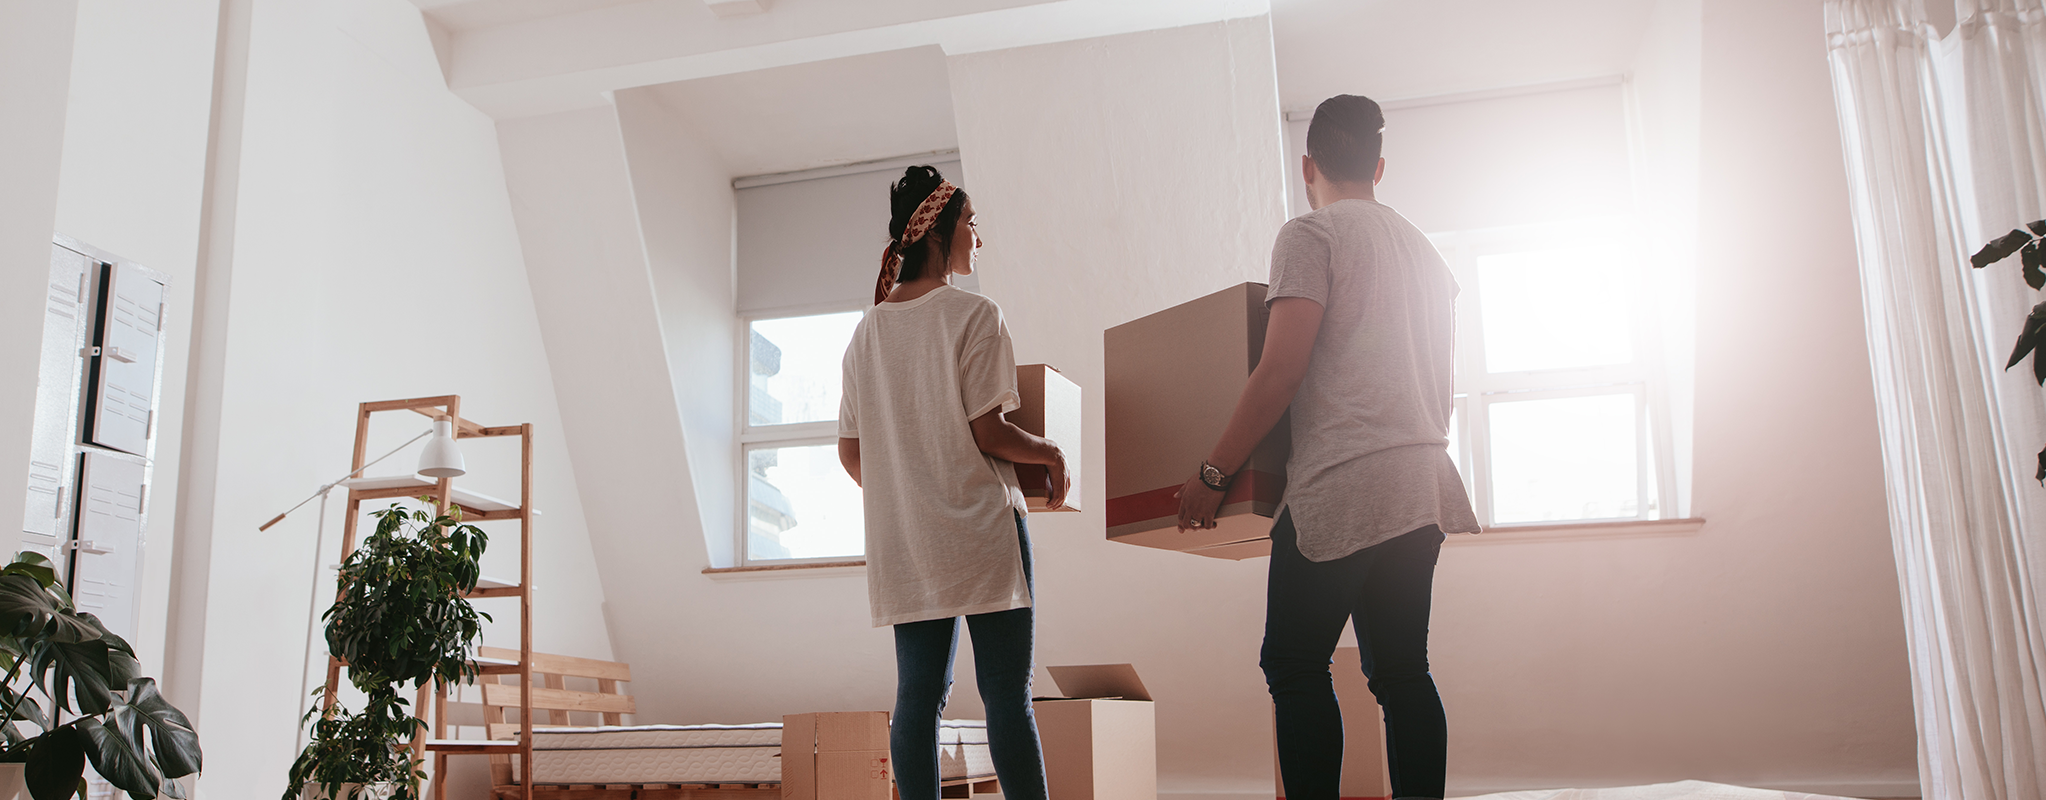 man and woman unpacking boxes in new home